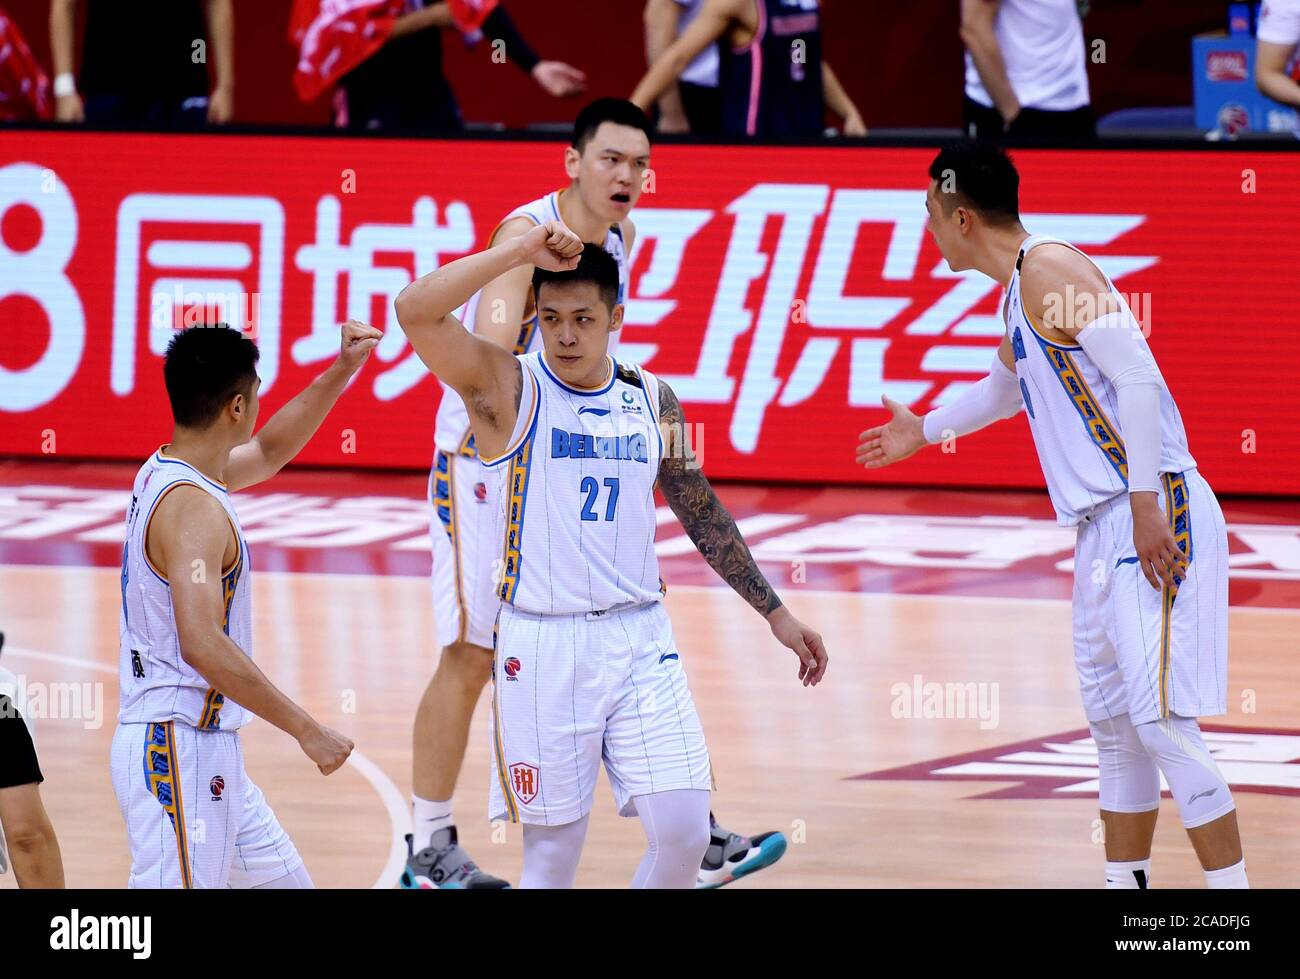 Qingdao, China's Shandong Province. 6th Aug, 2020. Players of Beijing Ducks celebrate after the semifinal match between Beijing Ducks and Guangdong Southern Tigers at the 2019-2020 Chinese Basketball Association (CBA) league in Qingdao, east China's Shandong Province, Aug. 6, 2020. Credit: Li Ziheng/Xinhua/Alamy Live News Stock Photo